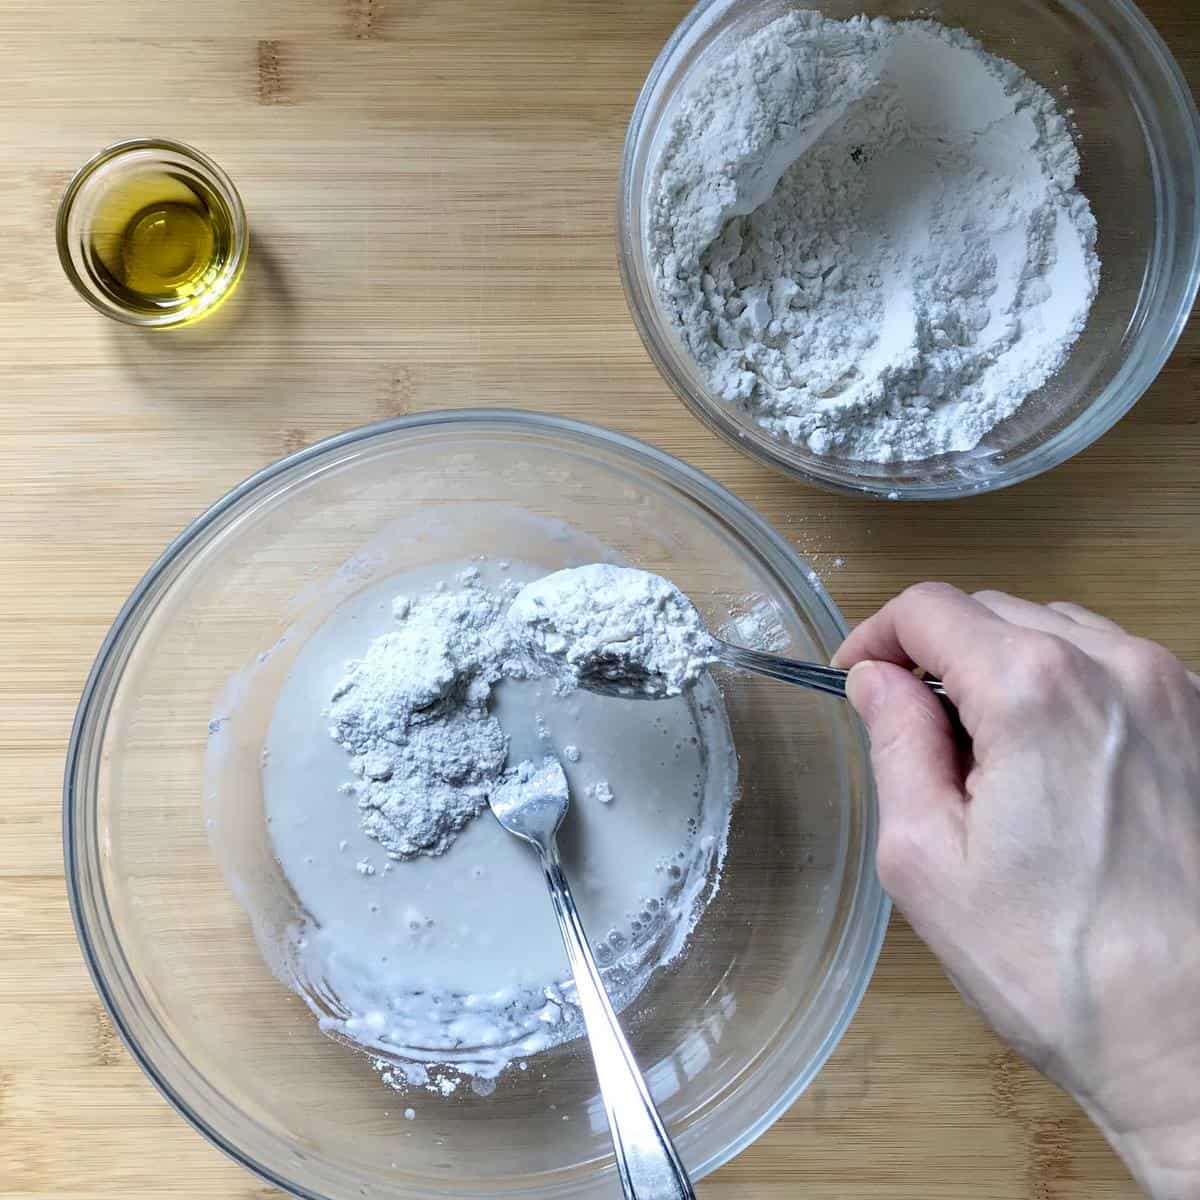 Flour being added to water in a bowl.